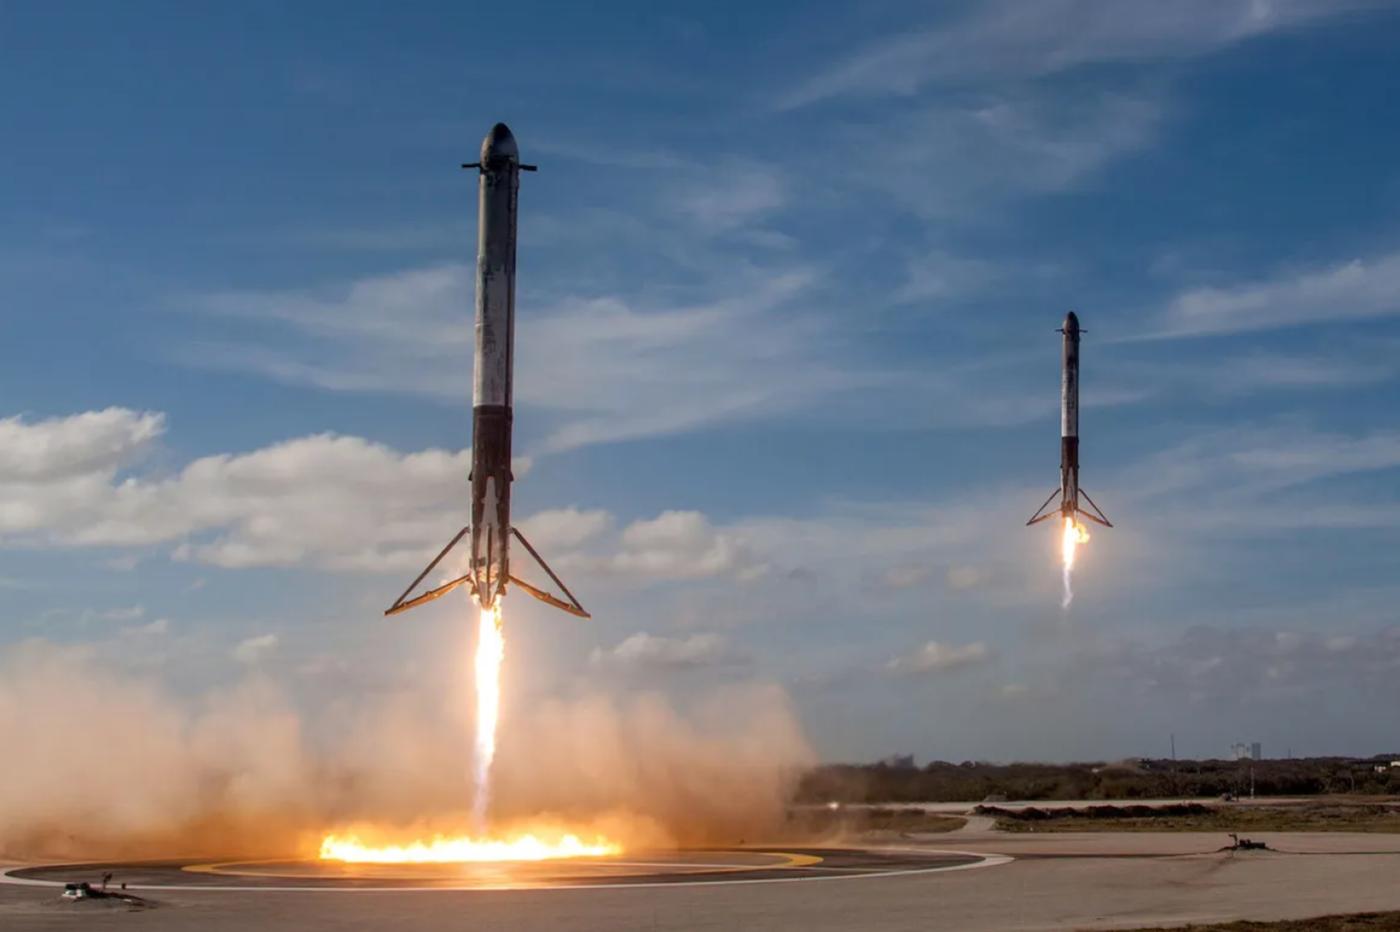 two SpaceX Falcon heavy boosters land at the same time